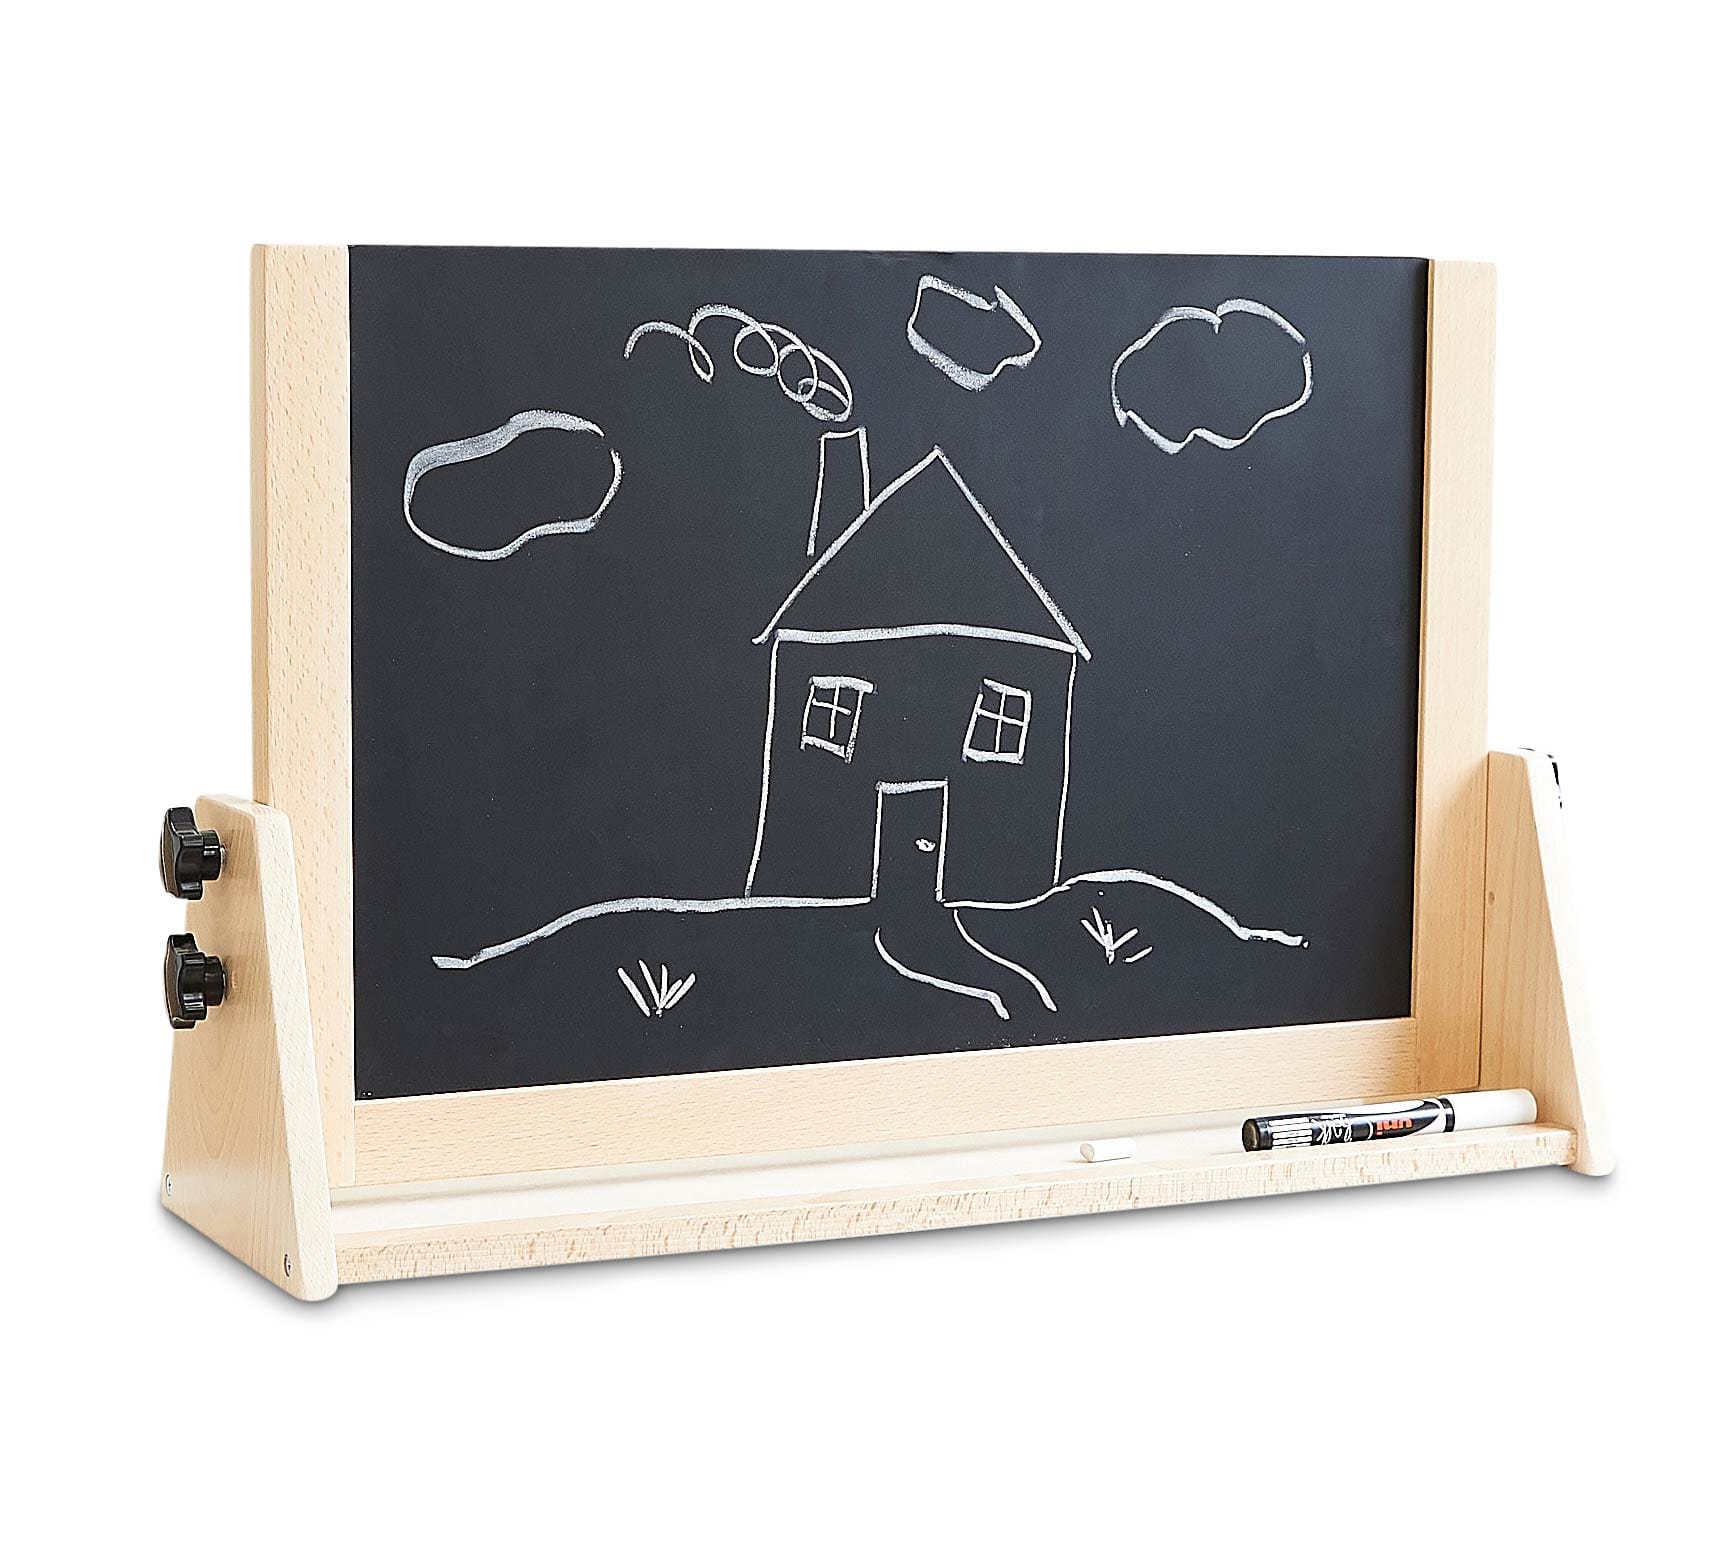 https://cdn.shopify.com/s/files/1/2525/8672/products/hipkids-4-in-1-table-top-easel-30759797620870.jpg?v=1669333751